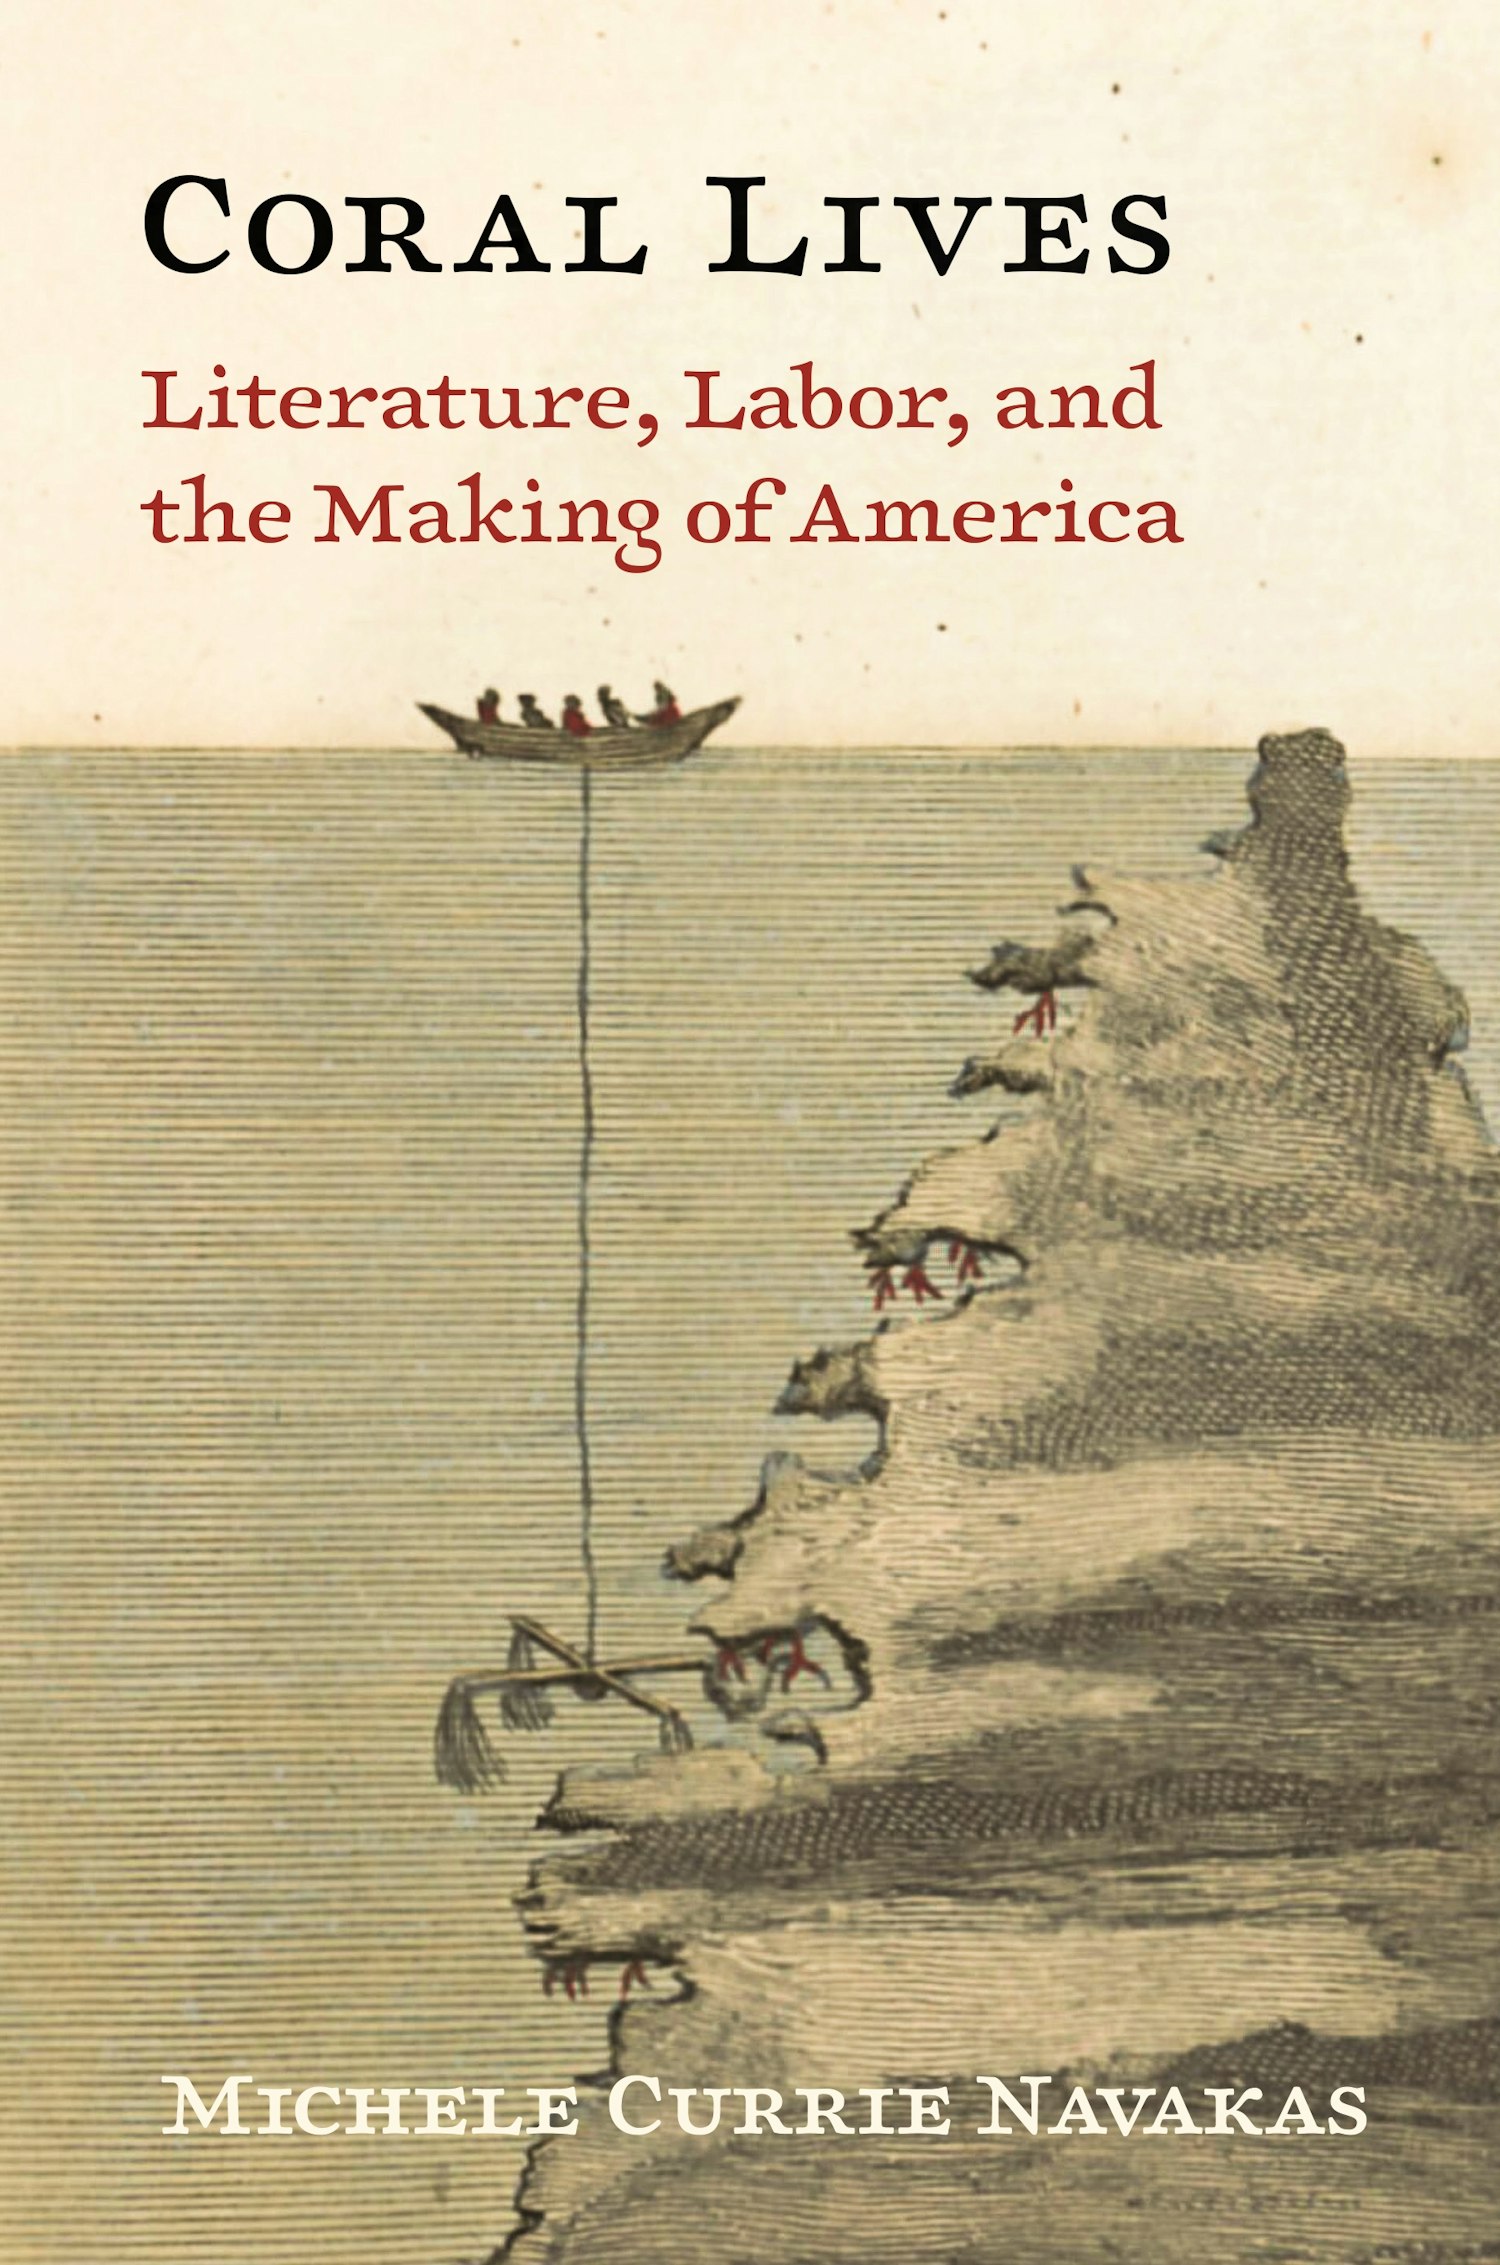  Literature, Labor, and the Making of America